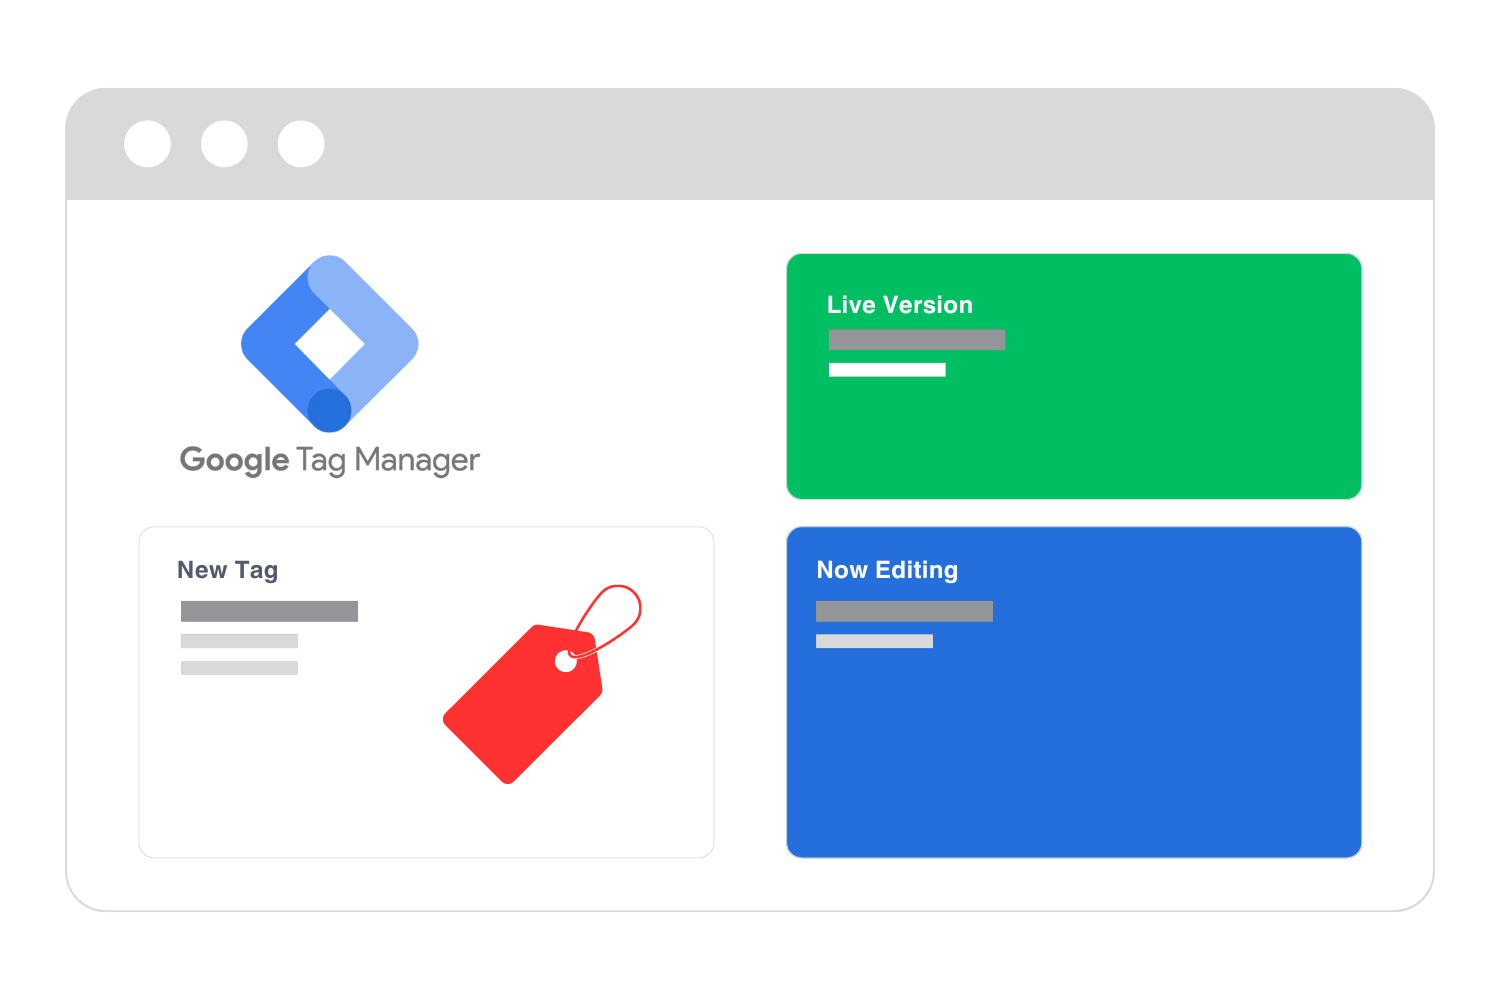 Need help with Google Tag Manager?